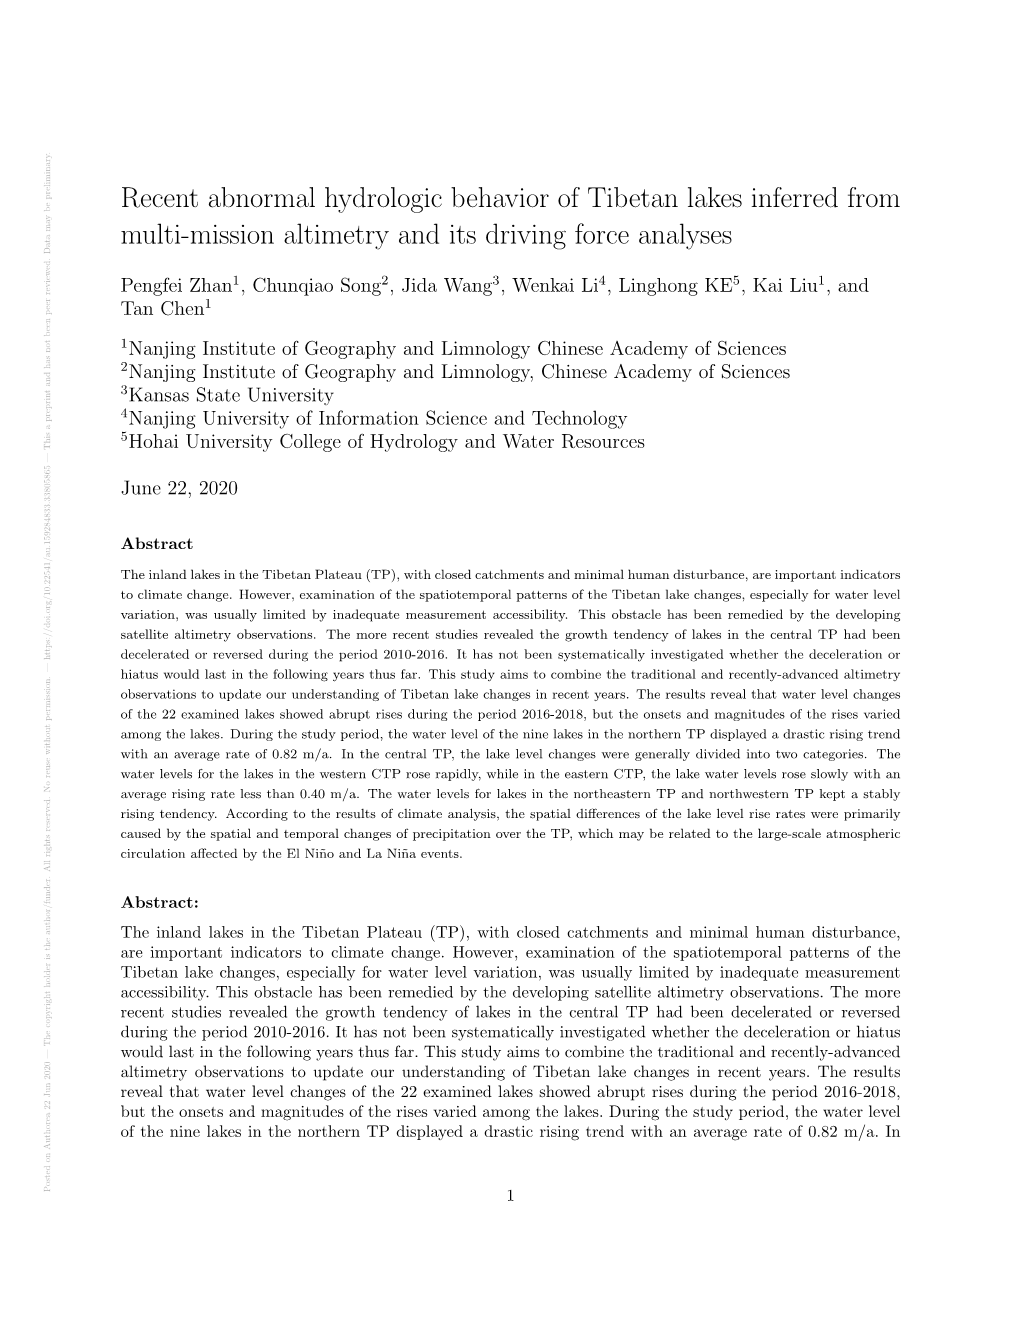 Recent Abnormal Hydrologic Behavior of Tibetan Lakes Inferred from Multi-Mission Altimetry and Its Driving Force Analyses